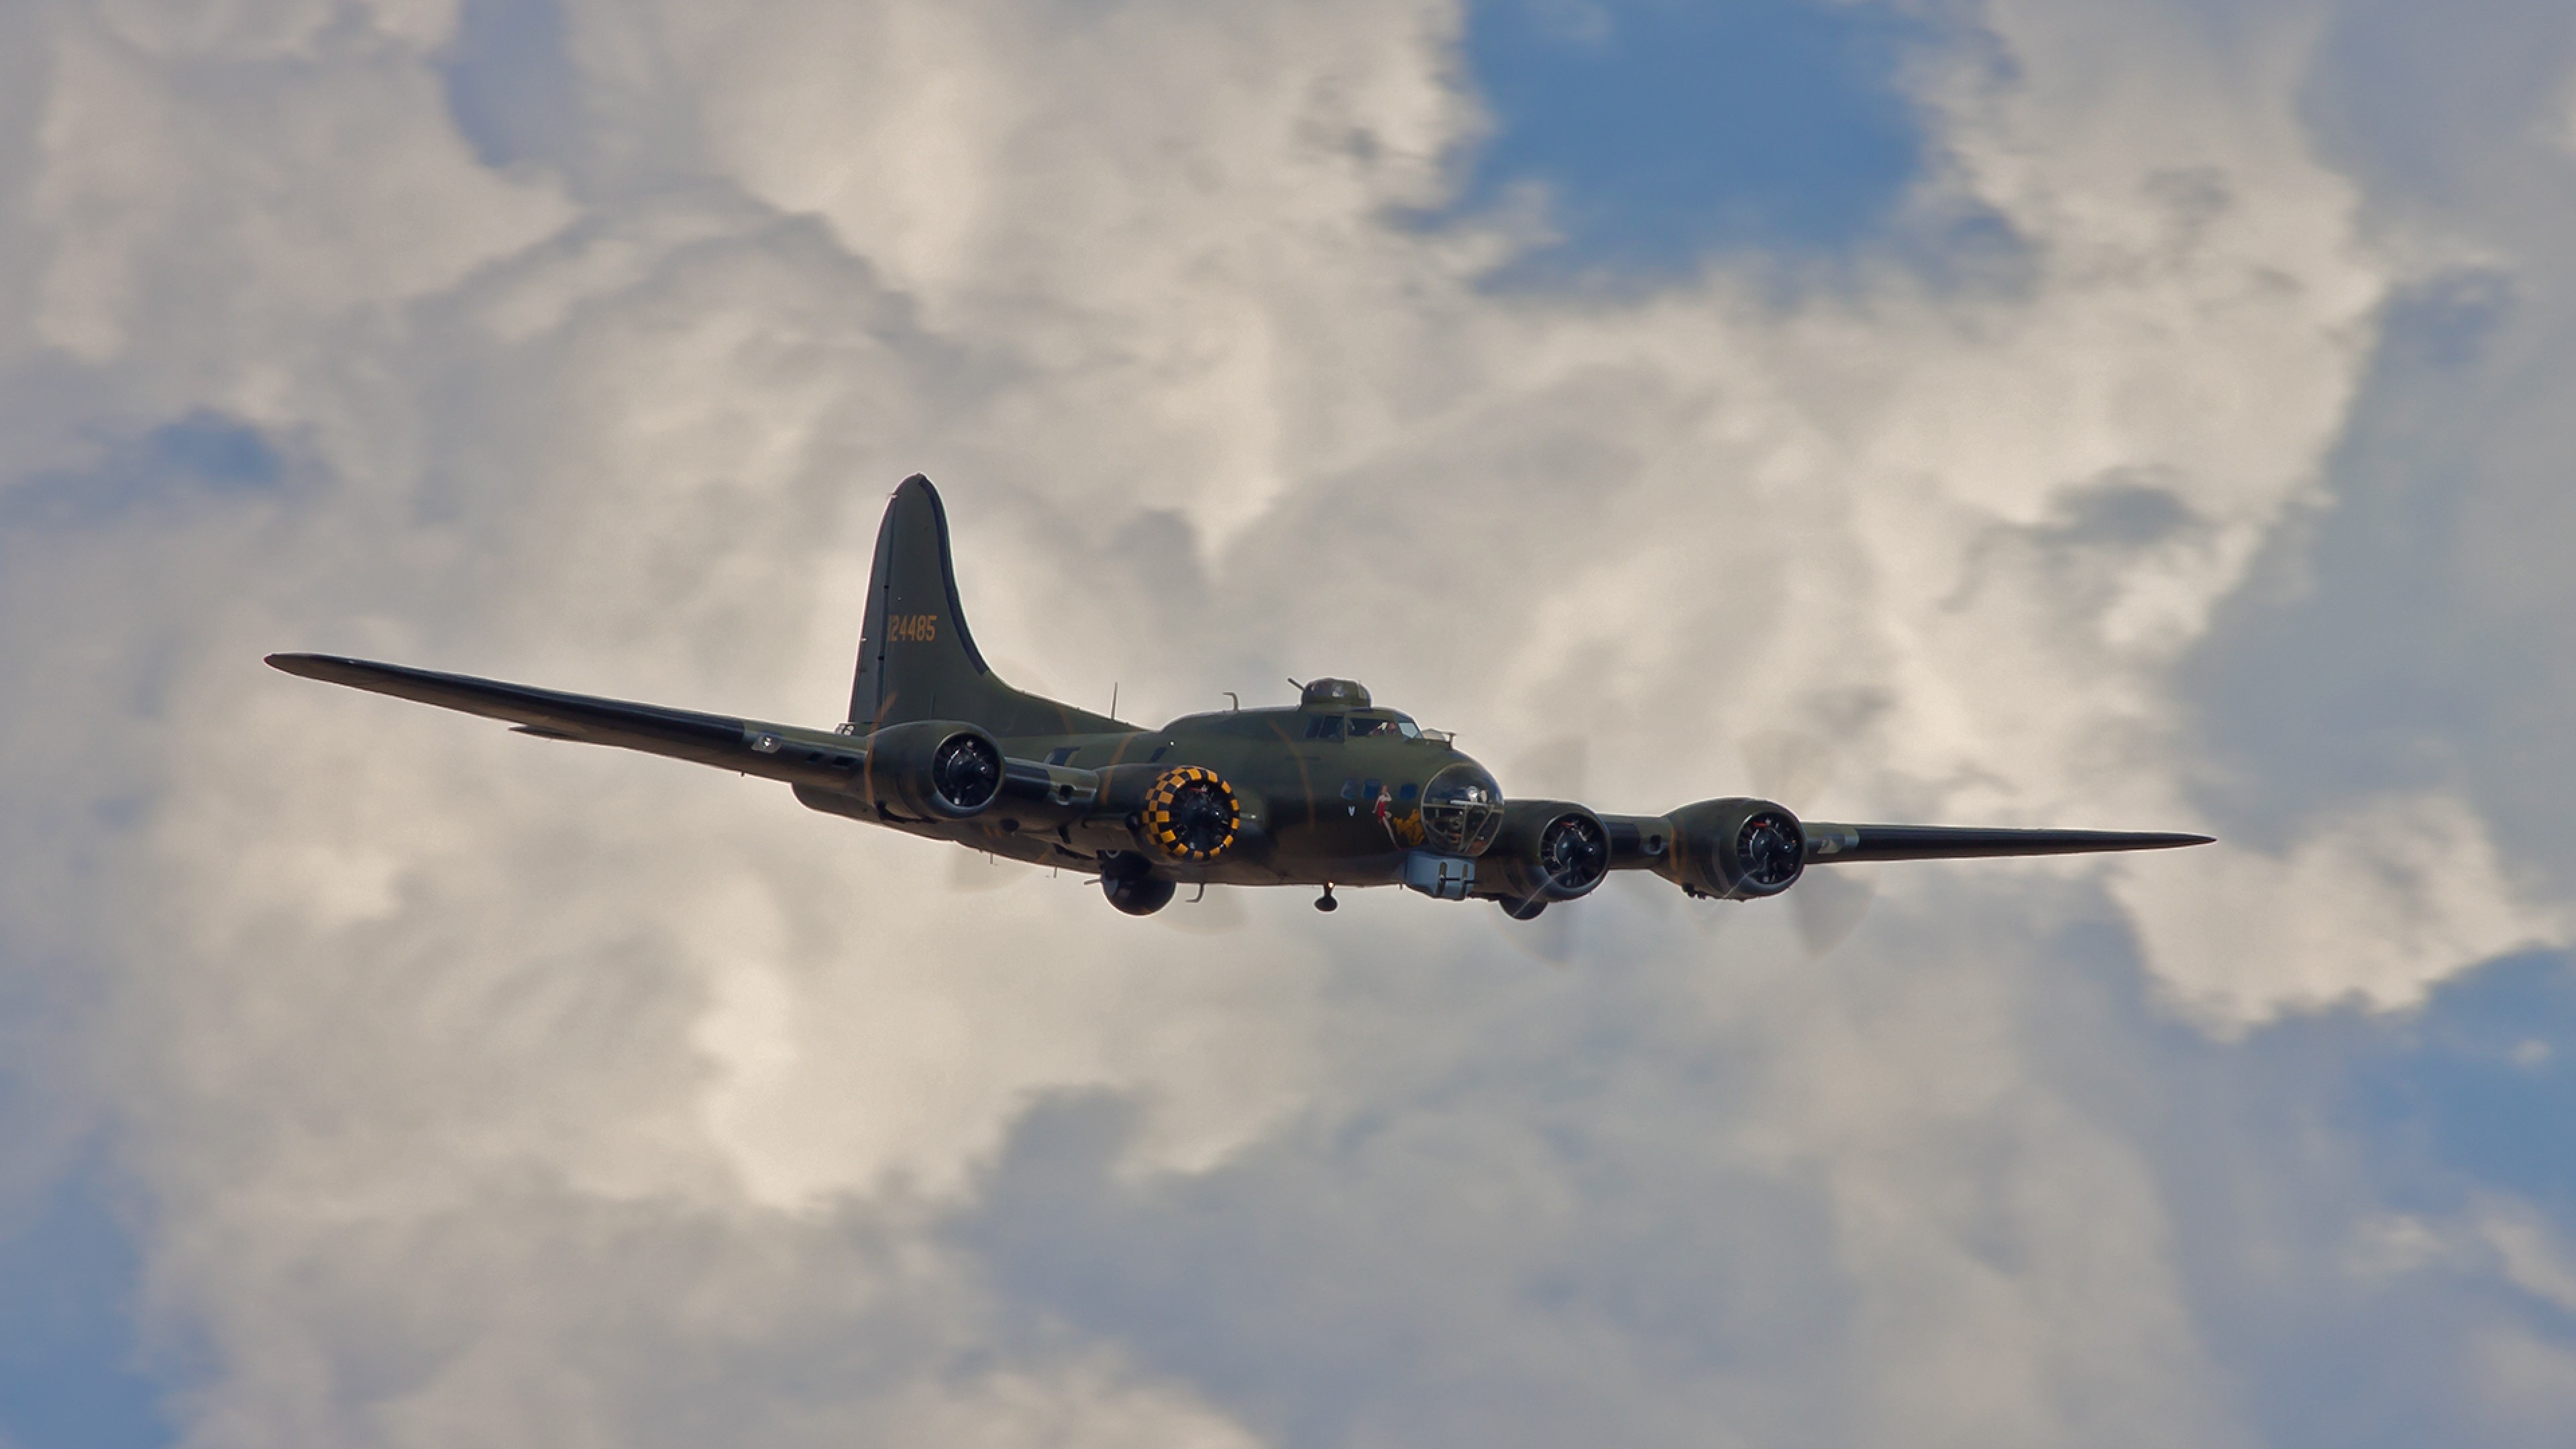 3840x2160  Wallpaper boeing b-17, flying fortress, bomber, sky, clouds